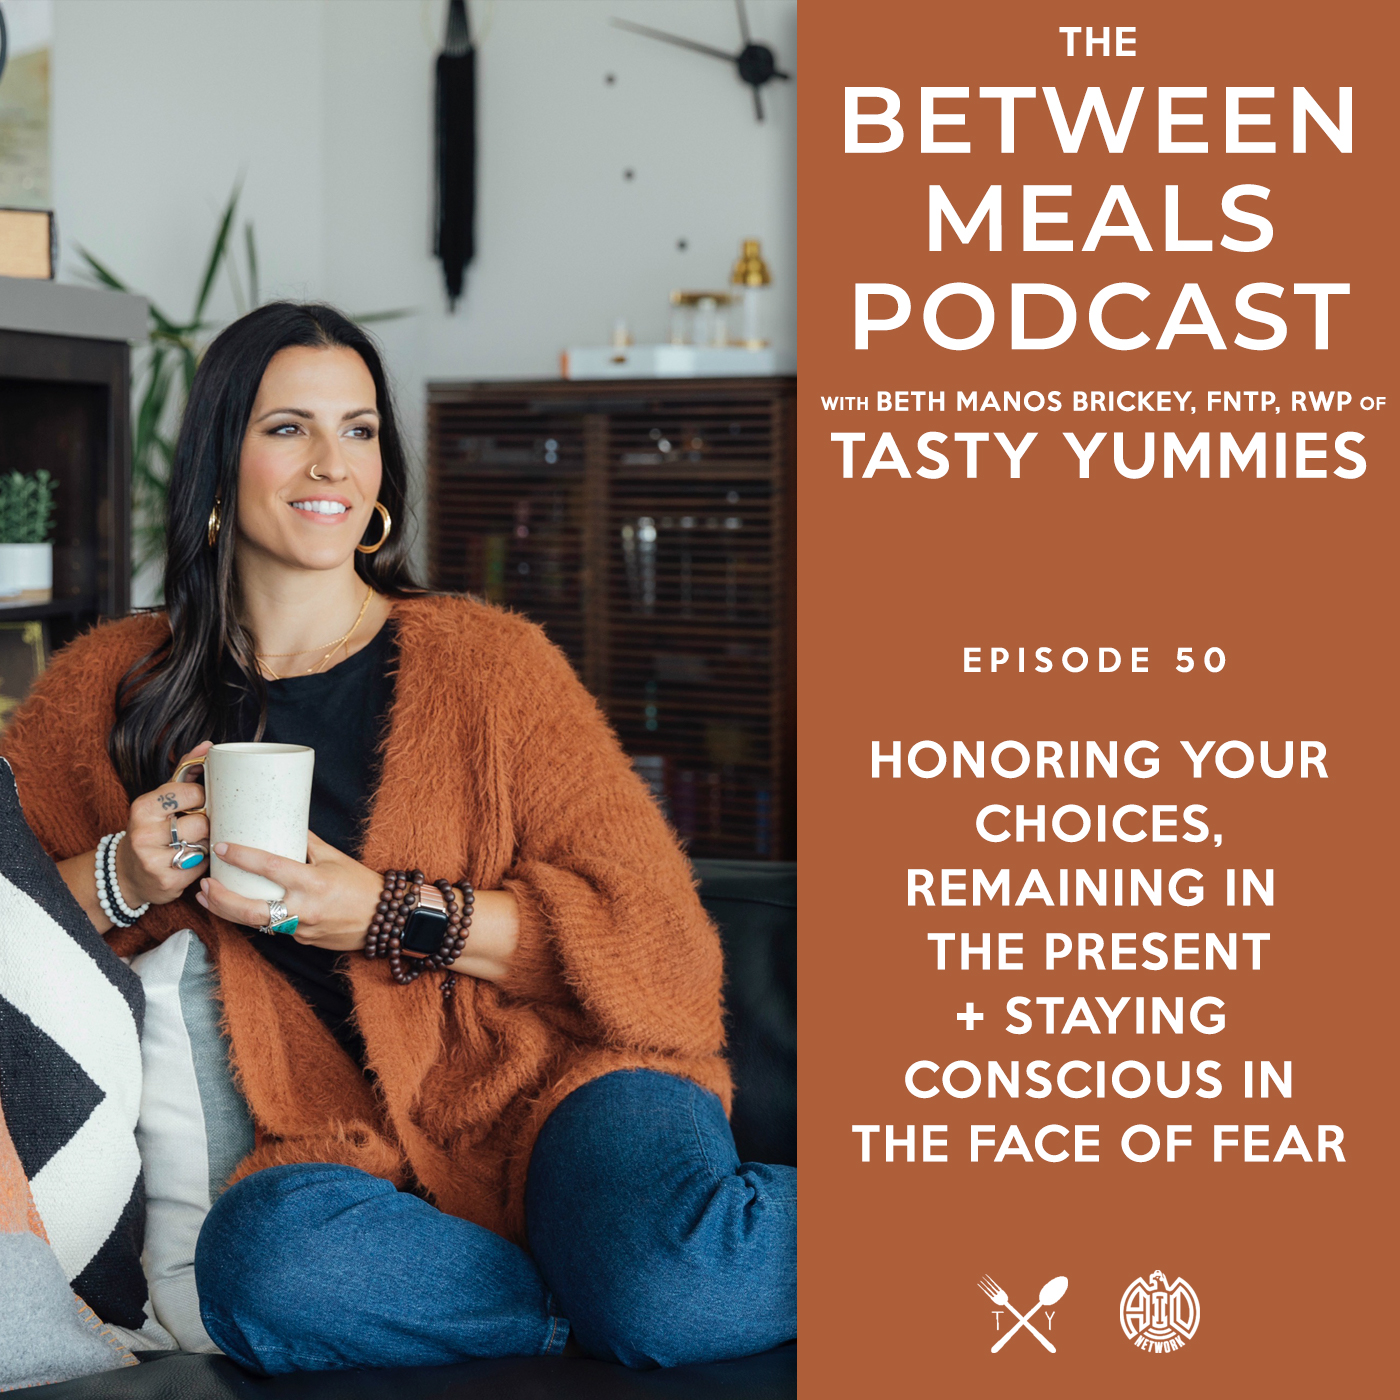 Between Meals Podcast. Episode 50: Honoring your choices, remaining in the present & staying conscious in the face of fear